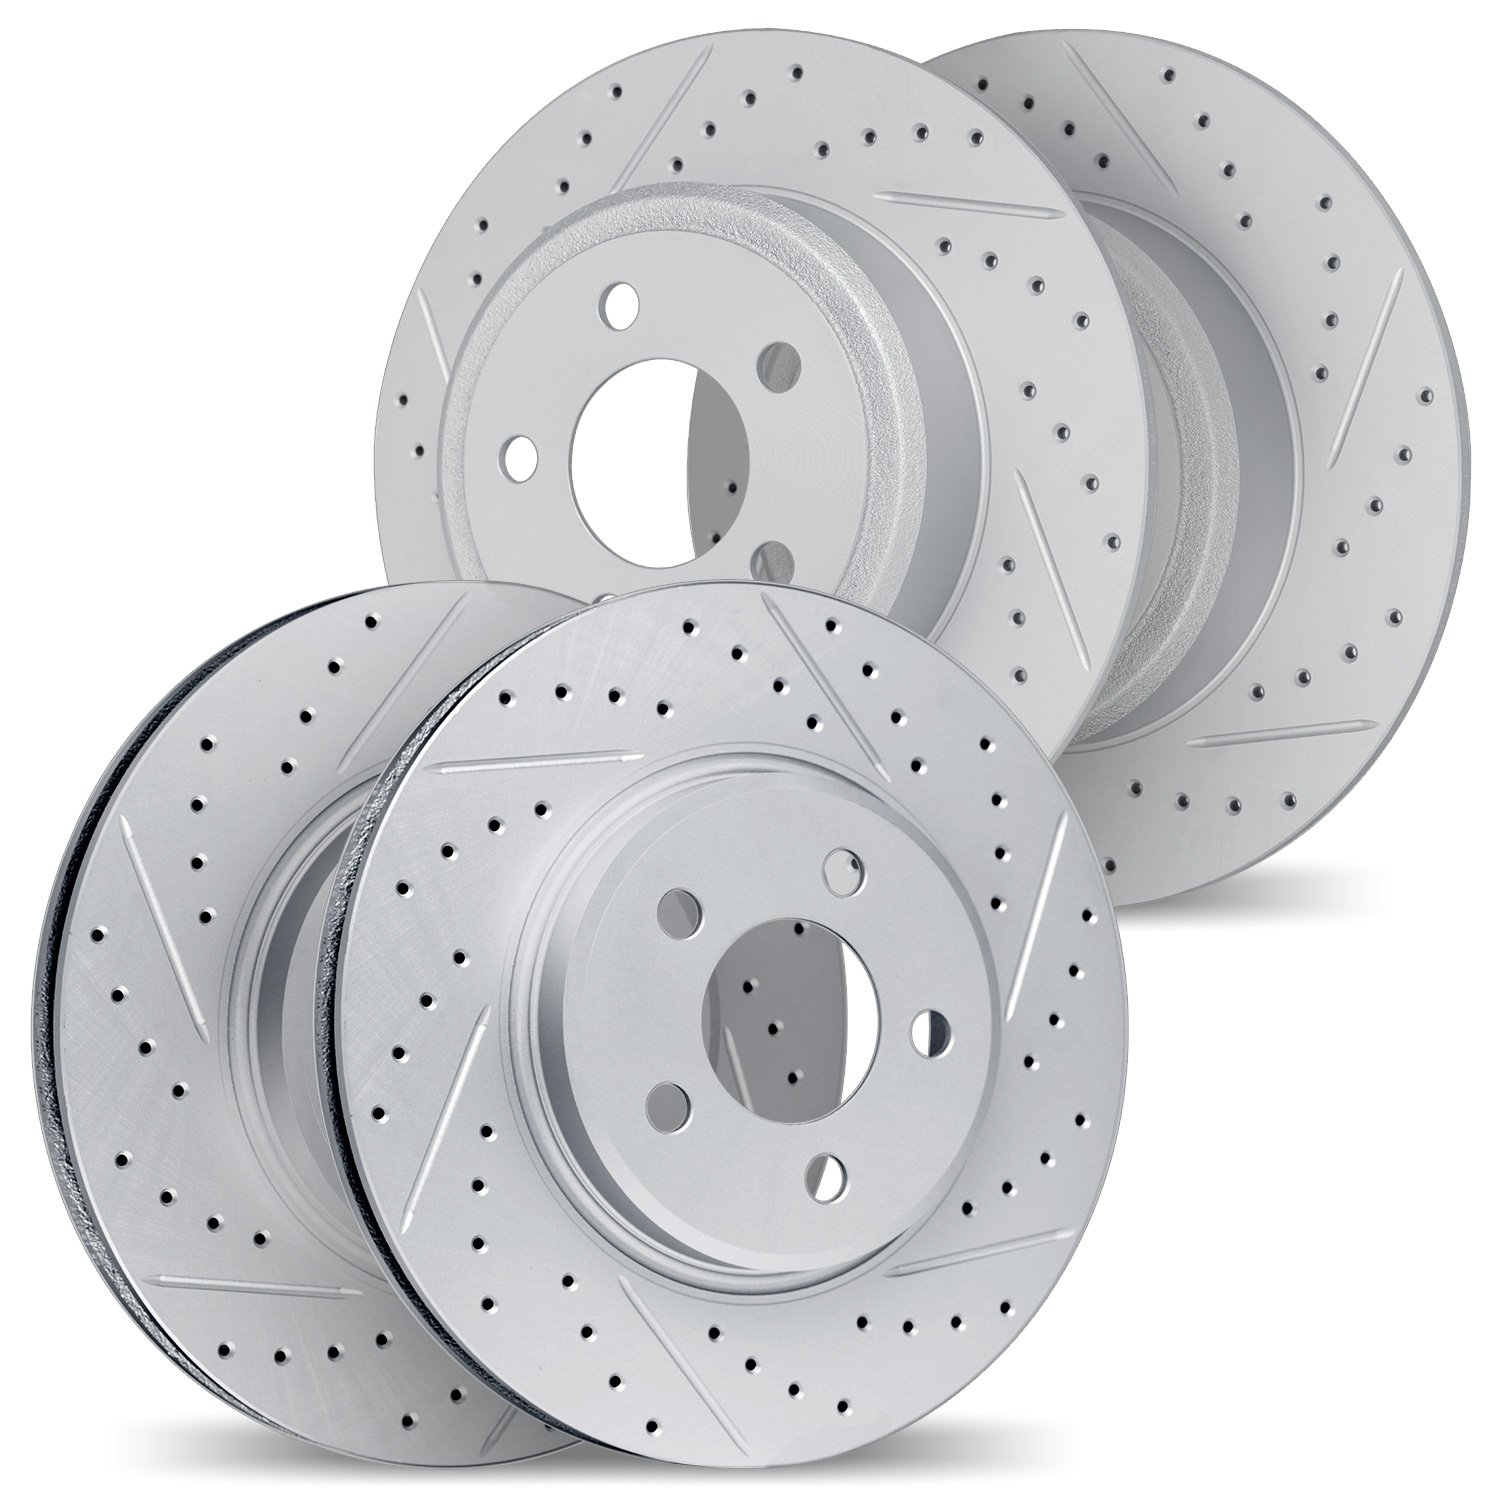 2004-45006 Geoperformance Drilled/Slotted Brake Rotors, 2016-2018 GM, Position: Front and Rear